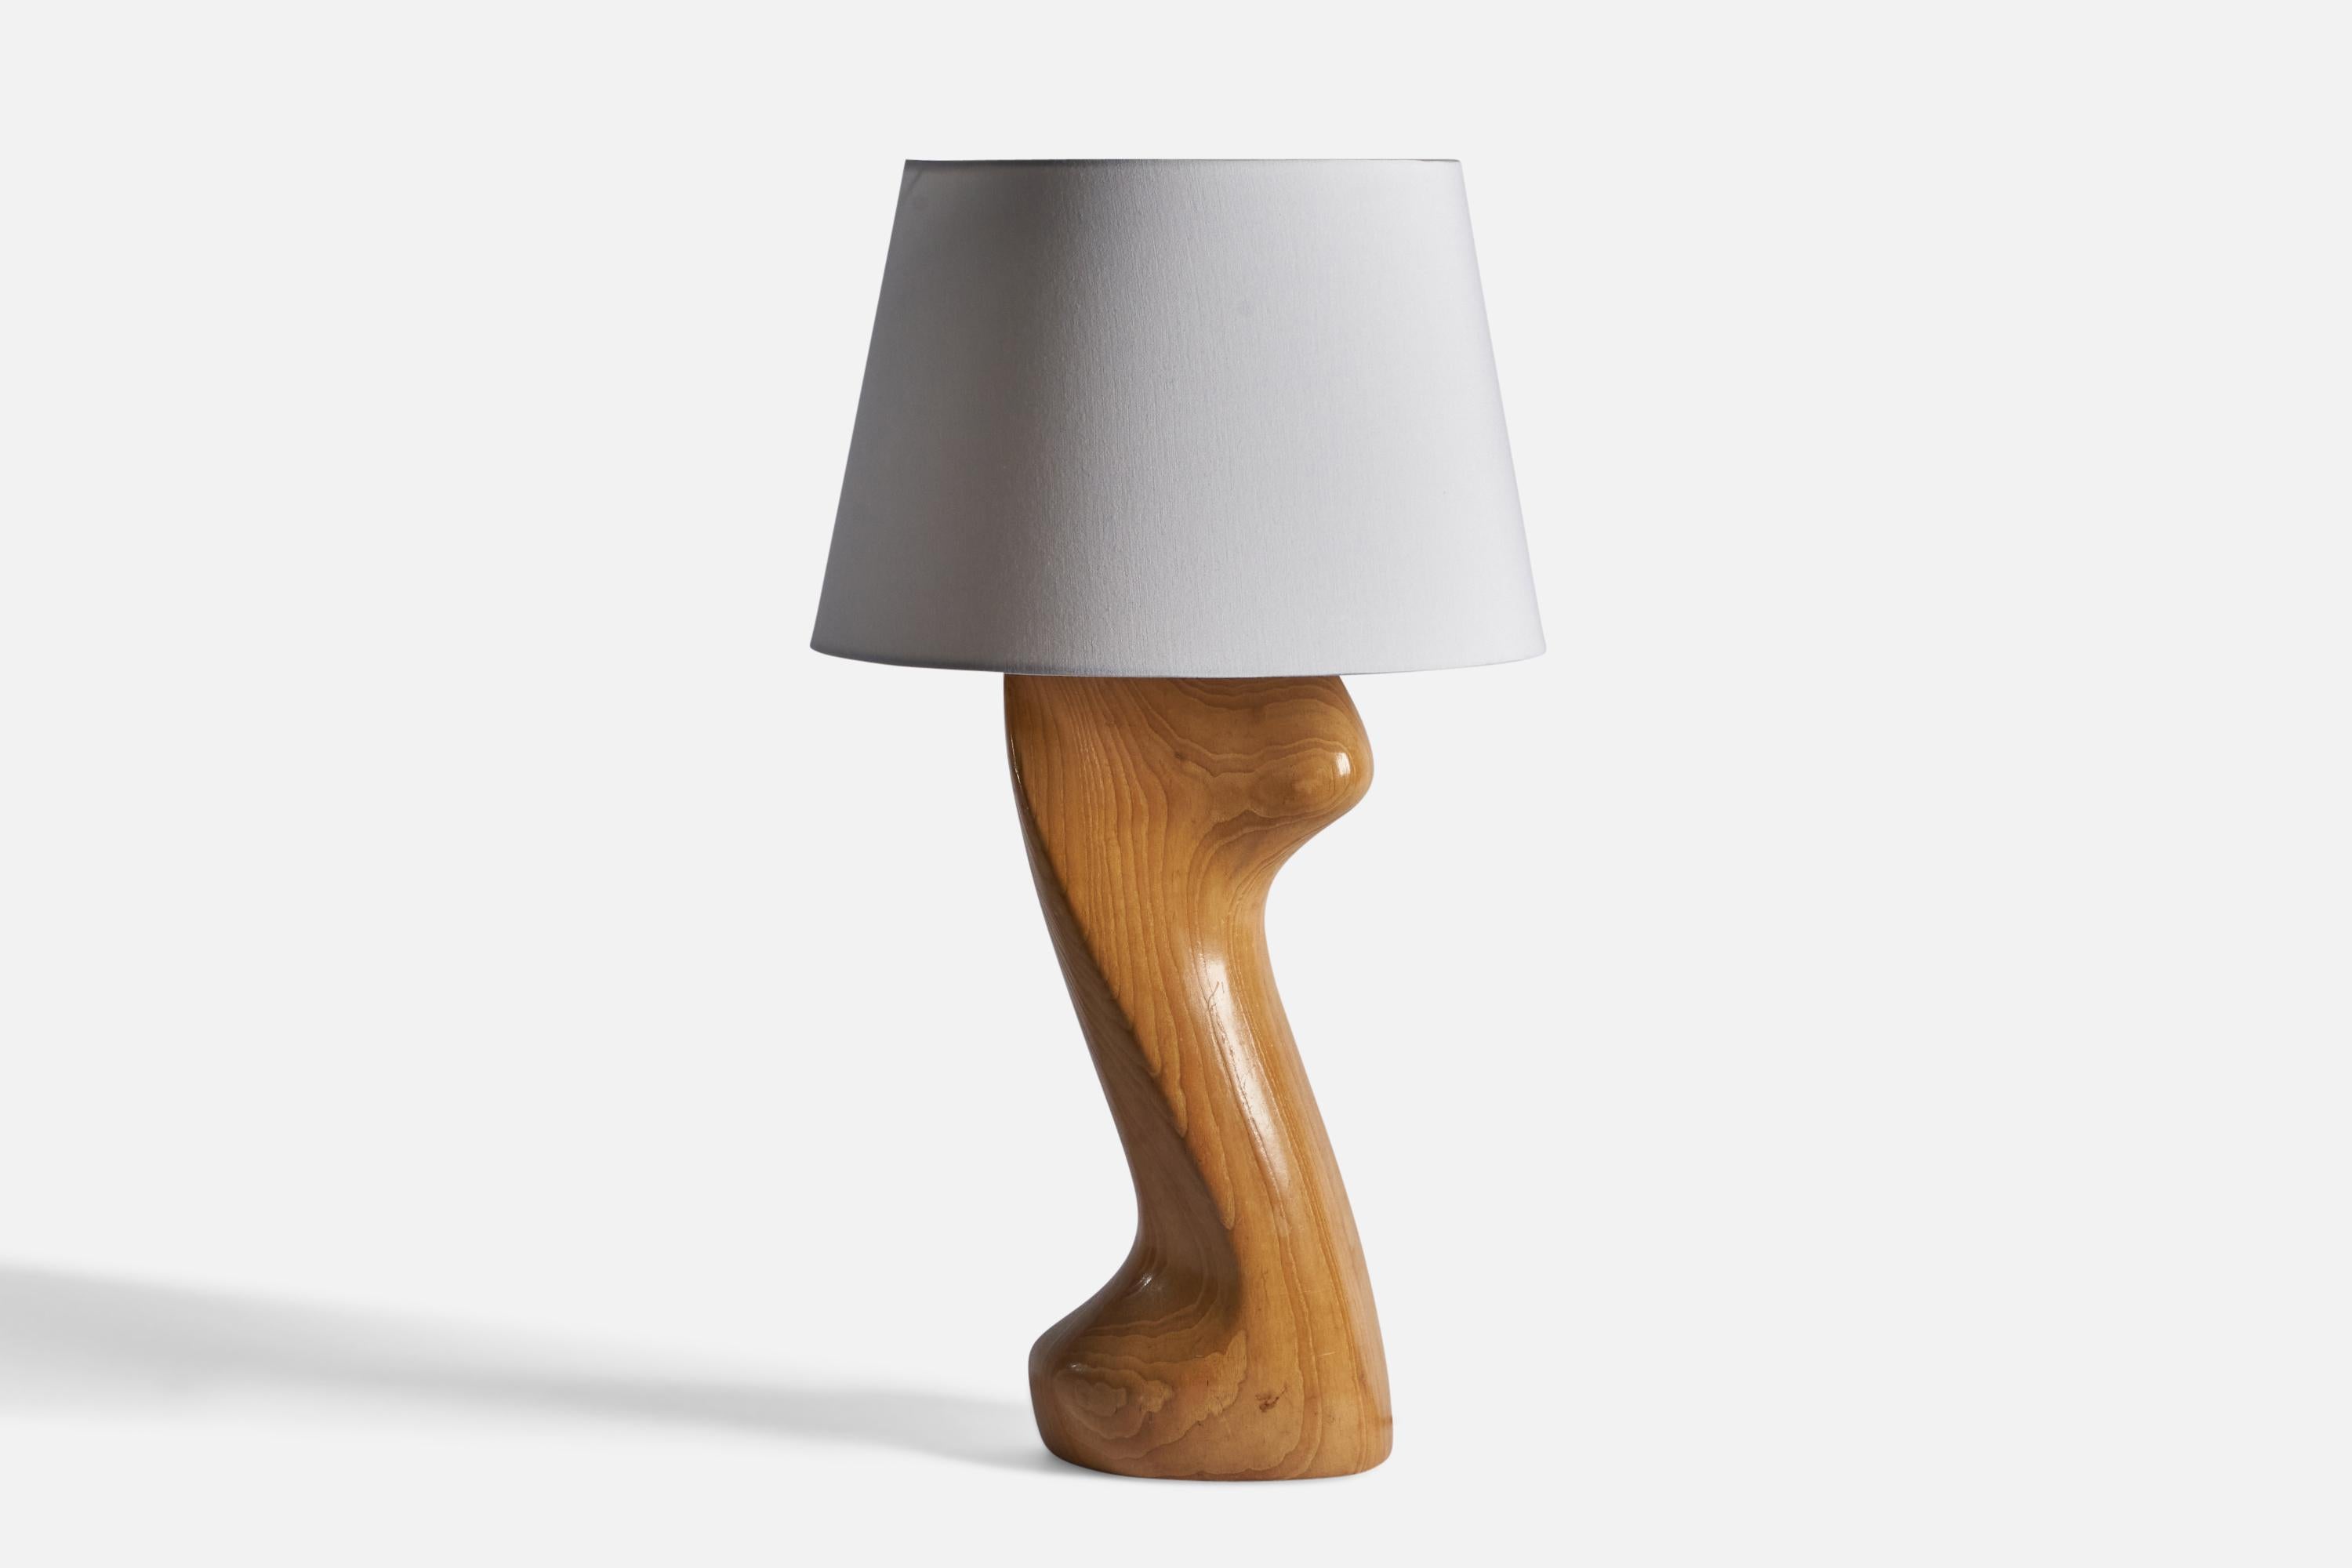 A sizeable solid oak table lamp, design and production attributed to Yasha Heifetz, USA, 1950s.

Dimensions of Lamp: 28.25